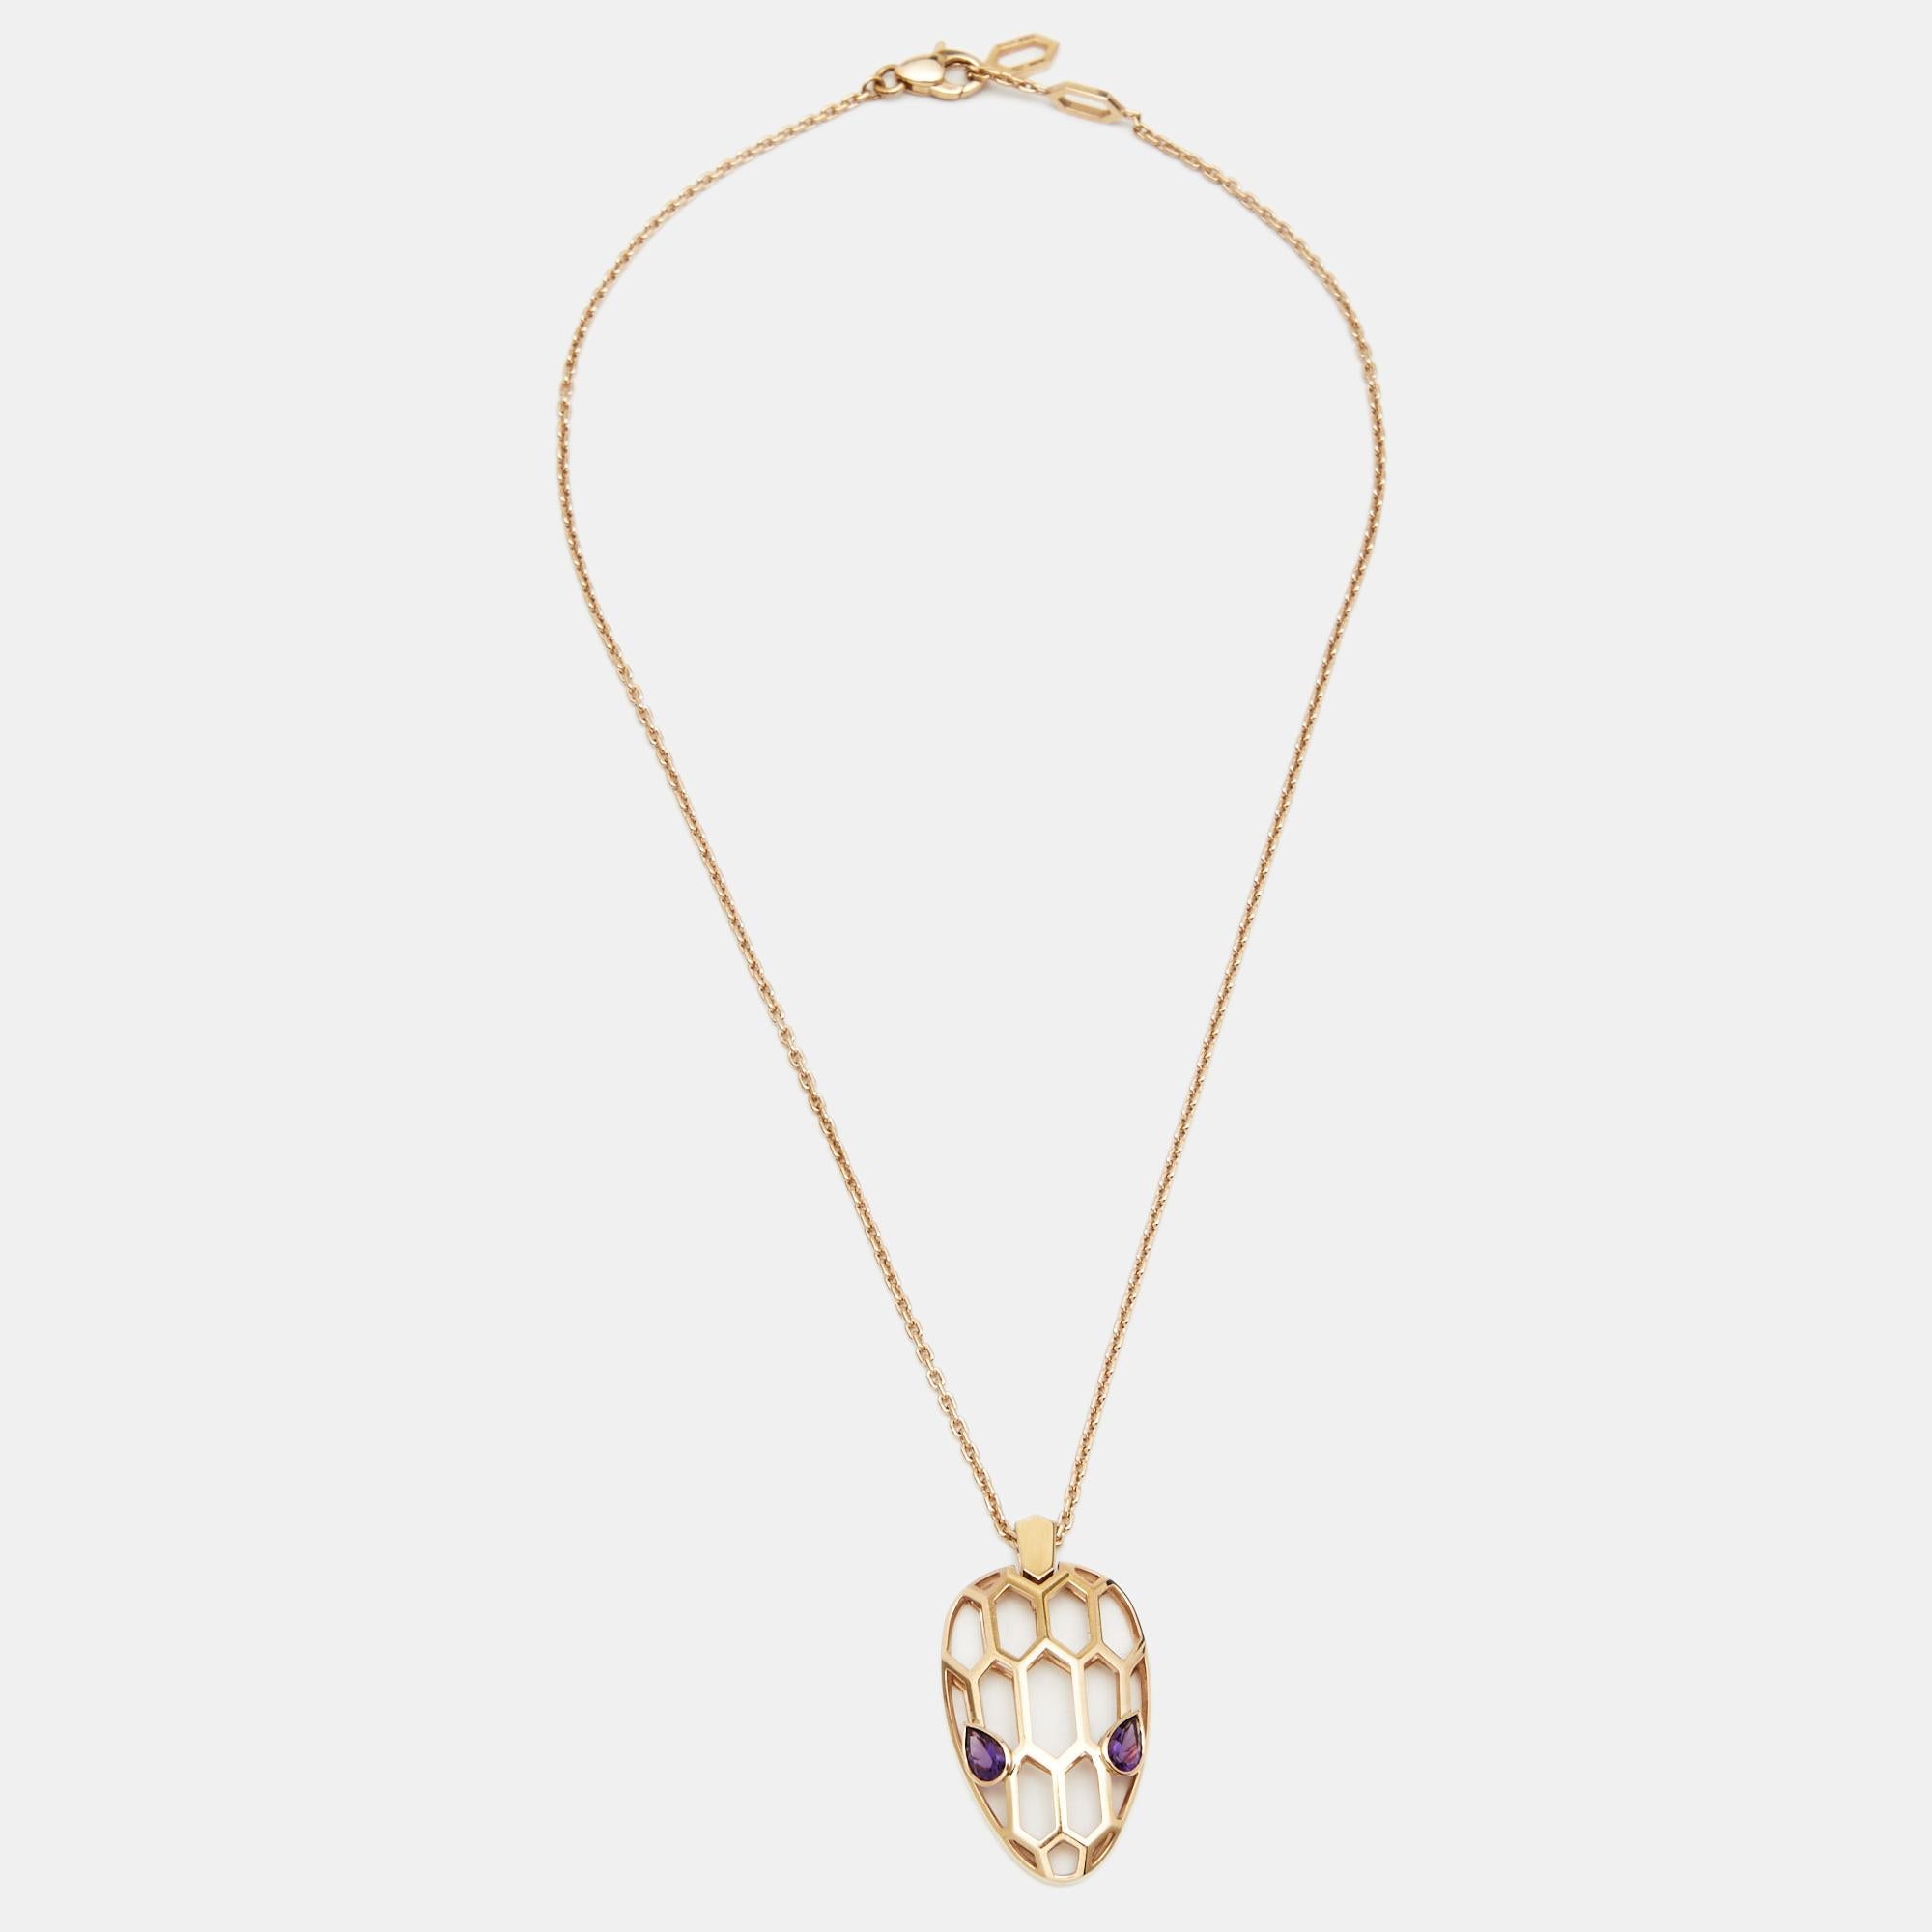 The iconic Serpenti designs from the house of Bvlgari can now be paired with your special looks with effortless glam. This 18k rose gold Seduttori necklace features a sleek & intricately crafted Serpenti head pendant adorned with Amethyst stones as